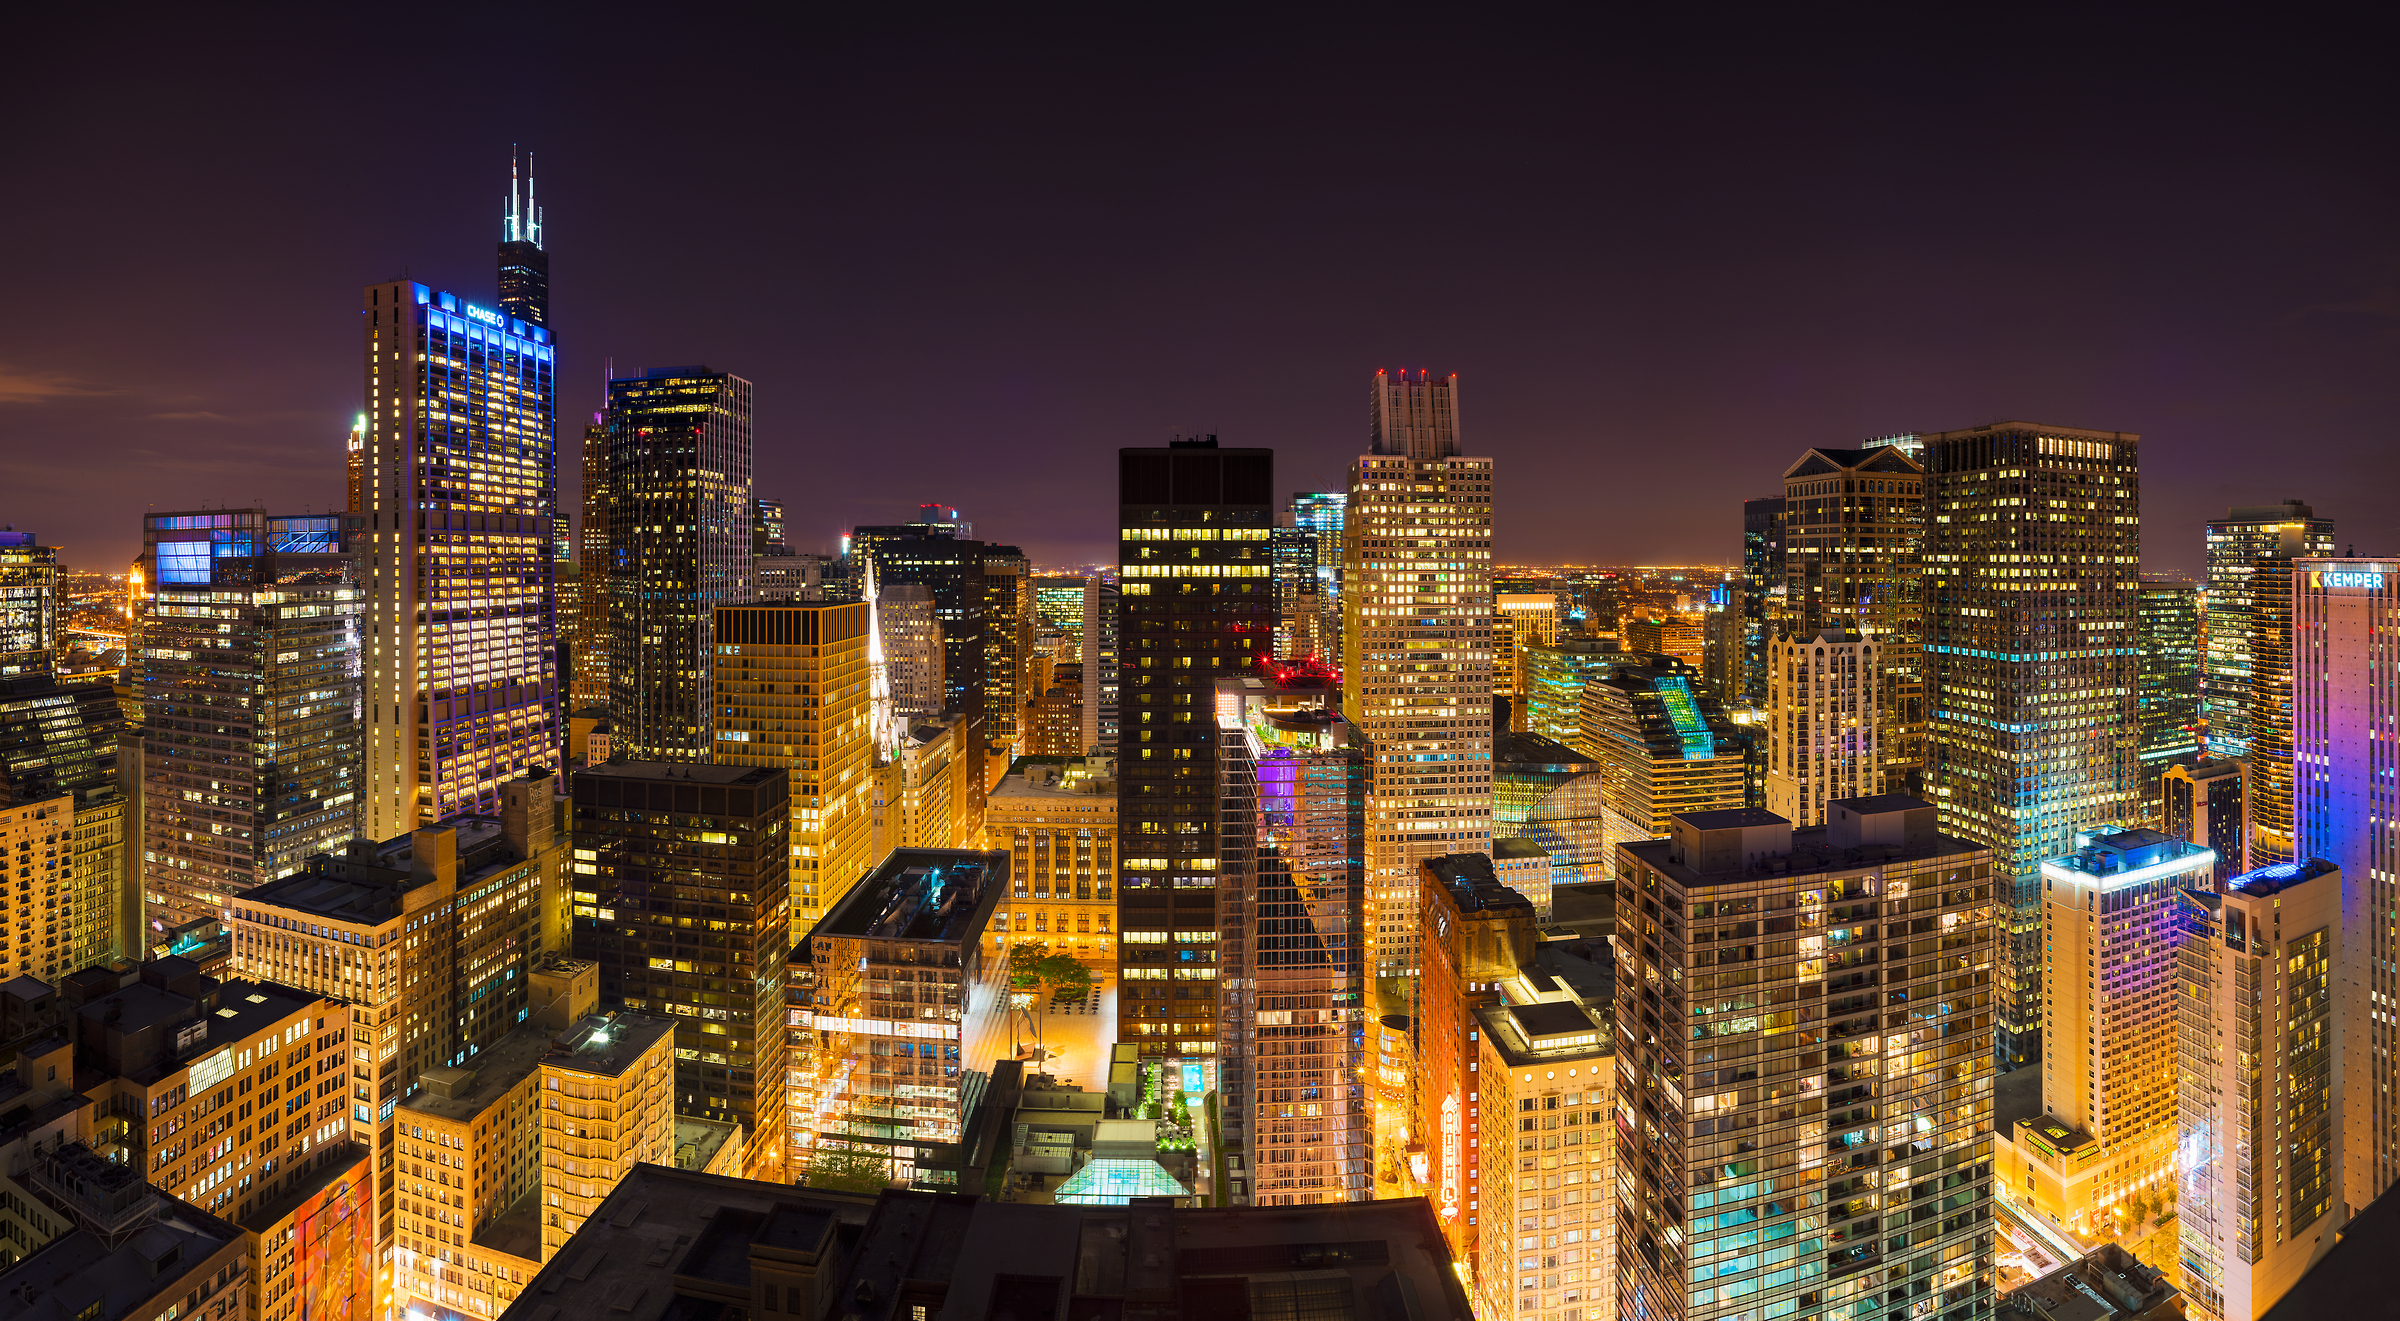 297 megapixels! A very high resolution, large-format VAST photo of a cityscape at night; skyline photograph created by Jim Tarpo in Chicago, Illinois.